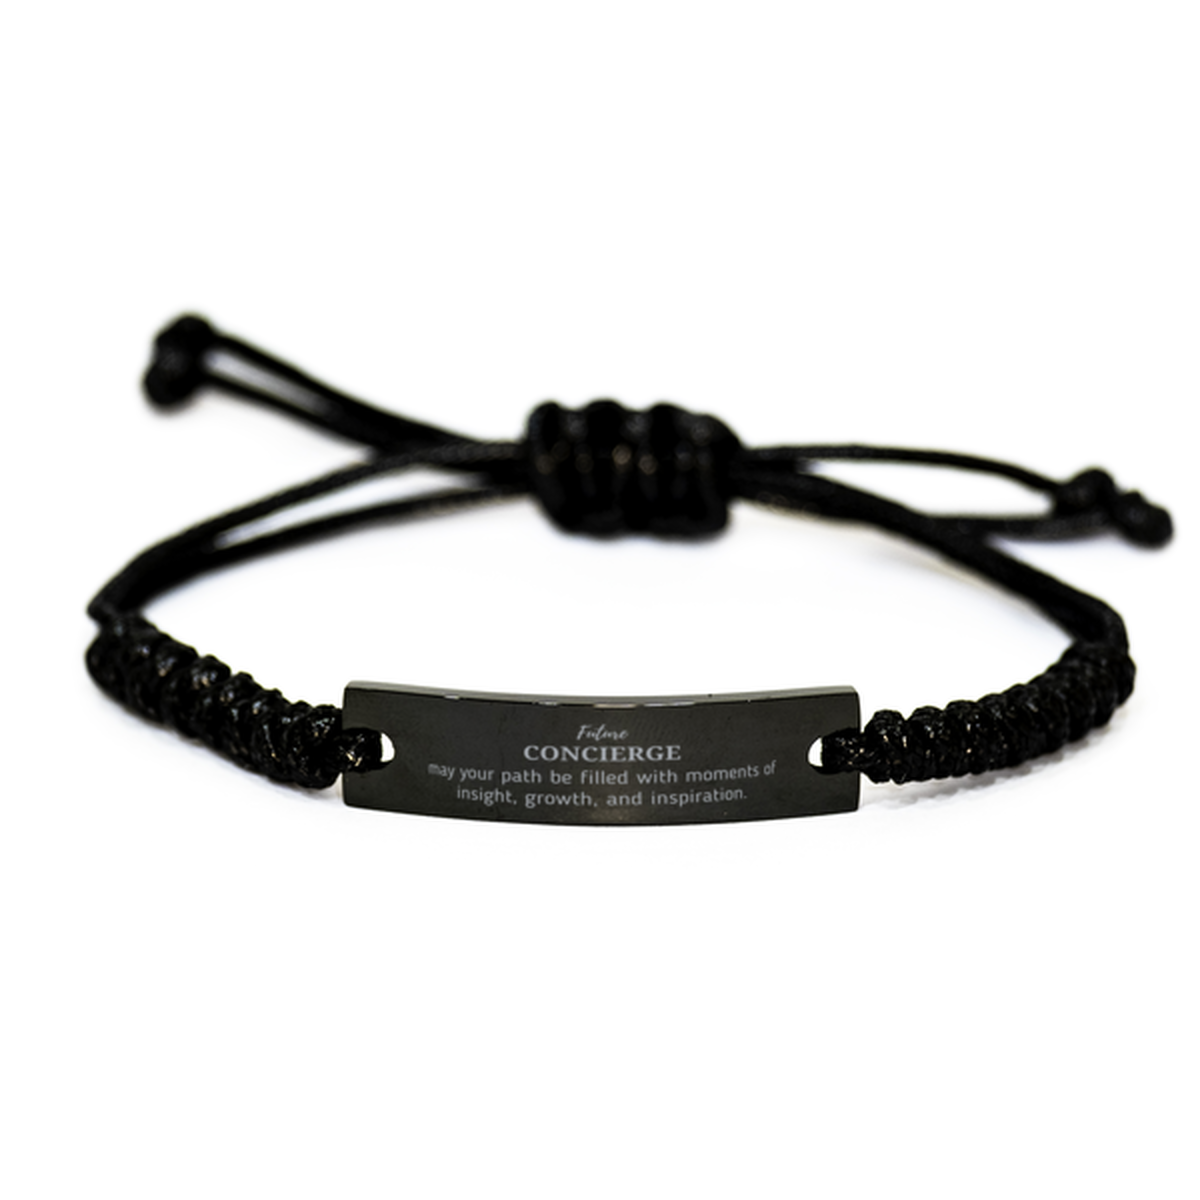 Future Concierge Gifts, May your path be filled with moments of insight, Graduation Gifts for New Concierge, Christmas Unique Black Rope Bracelet For Men, Women, Friends